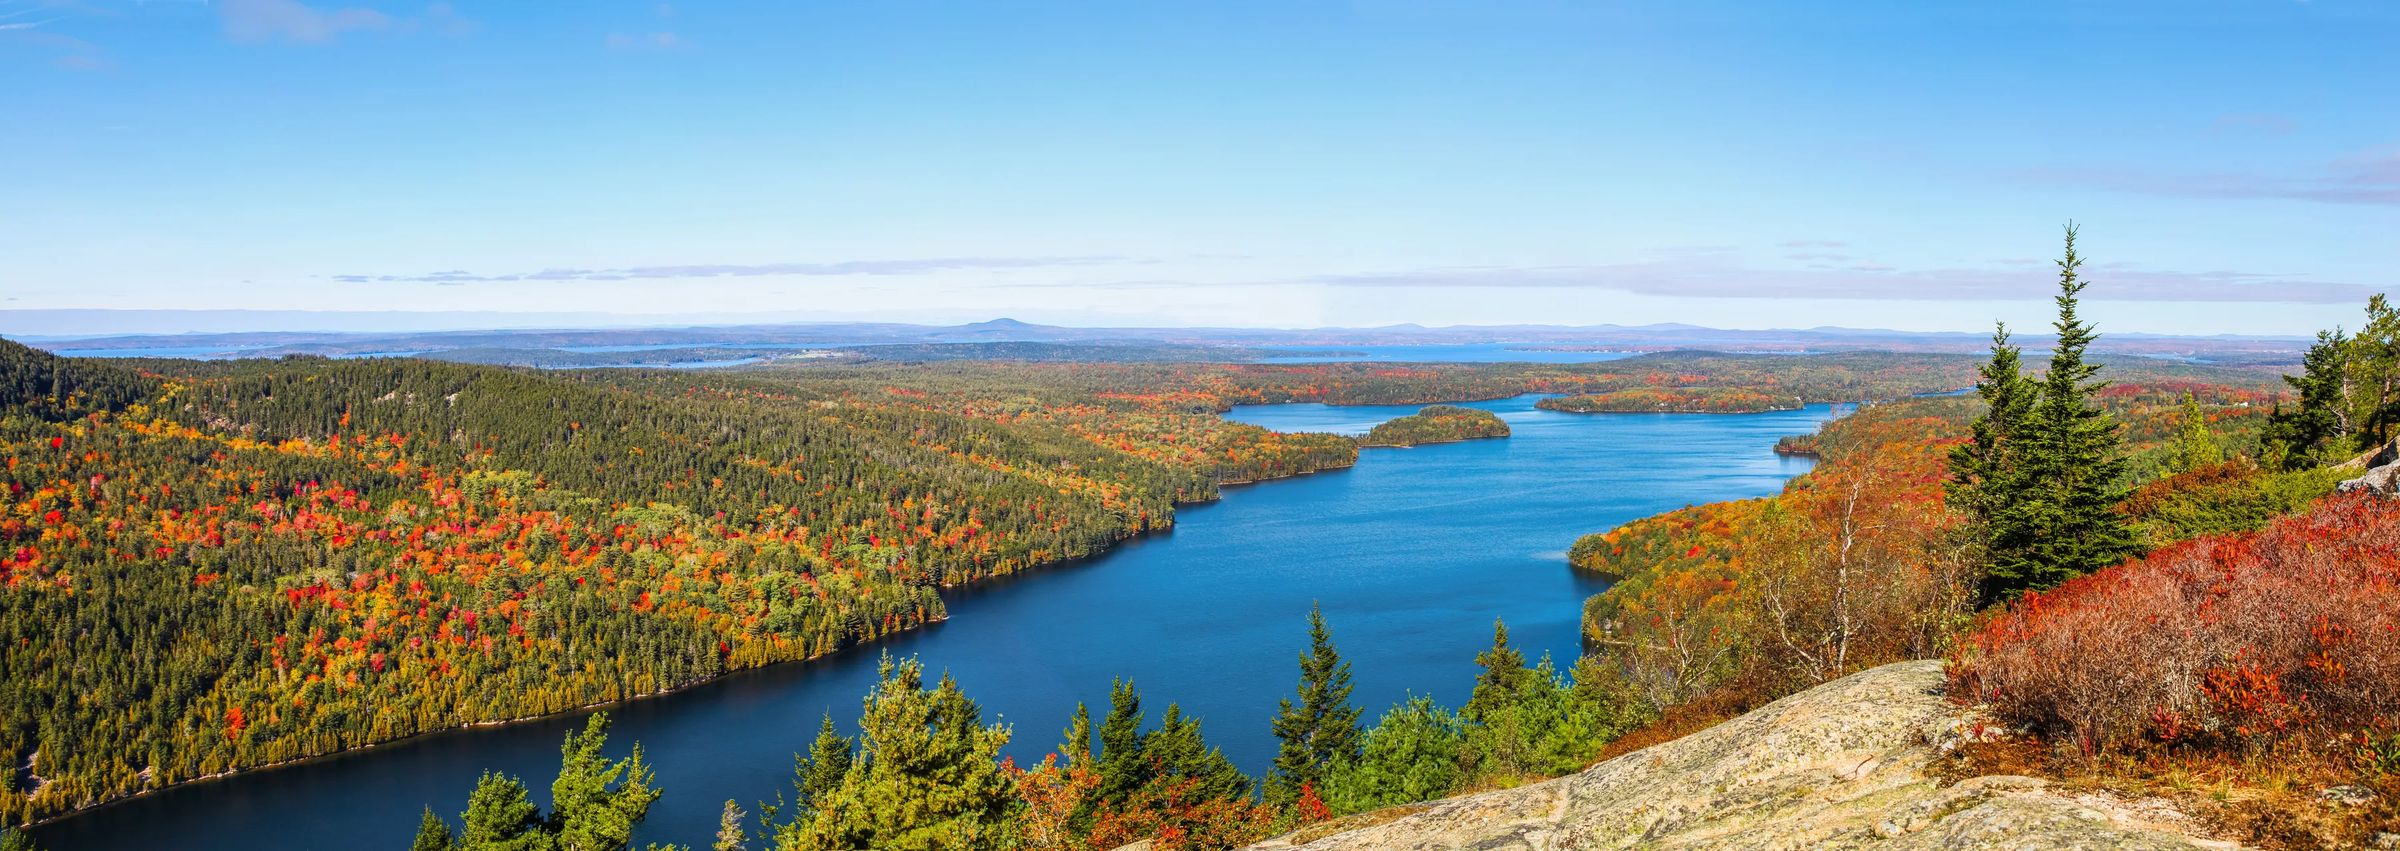 view from a mountain peak in acadia national park with beautiful orange and green fall colors